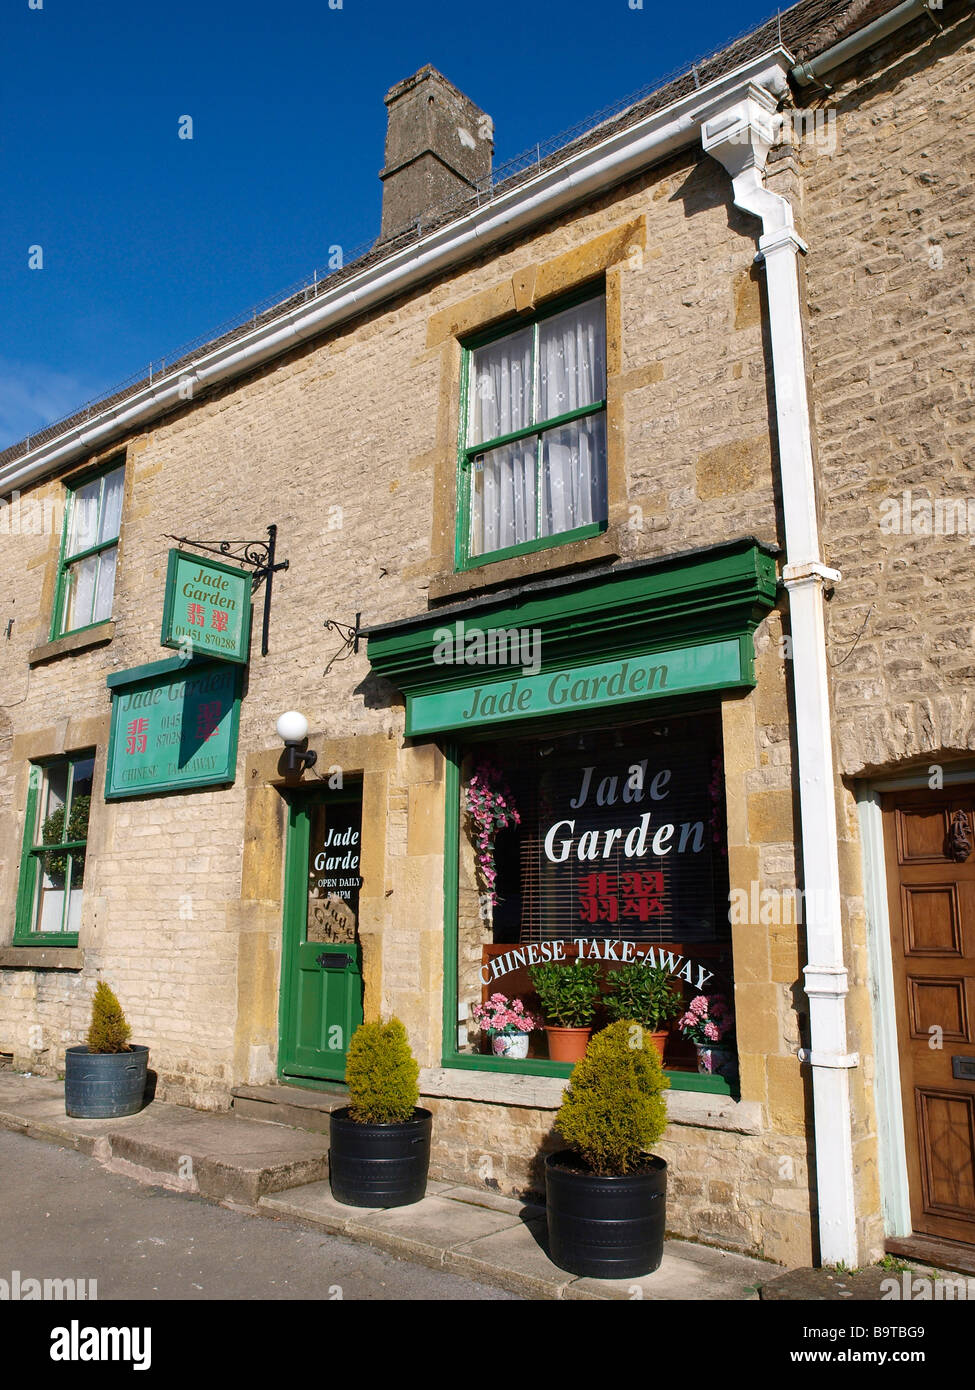 Jade Garden Chinese Take Away Stow On the Wold Cotswolds Gloucestershire England UK Stock Photo